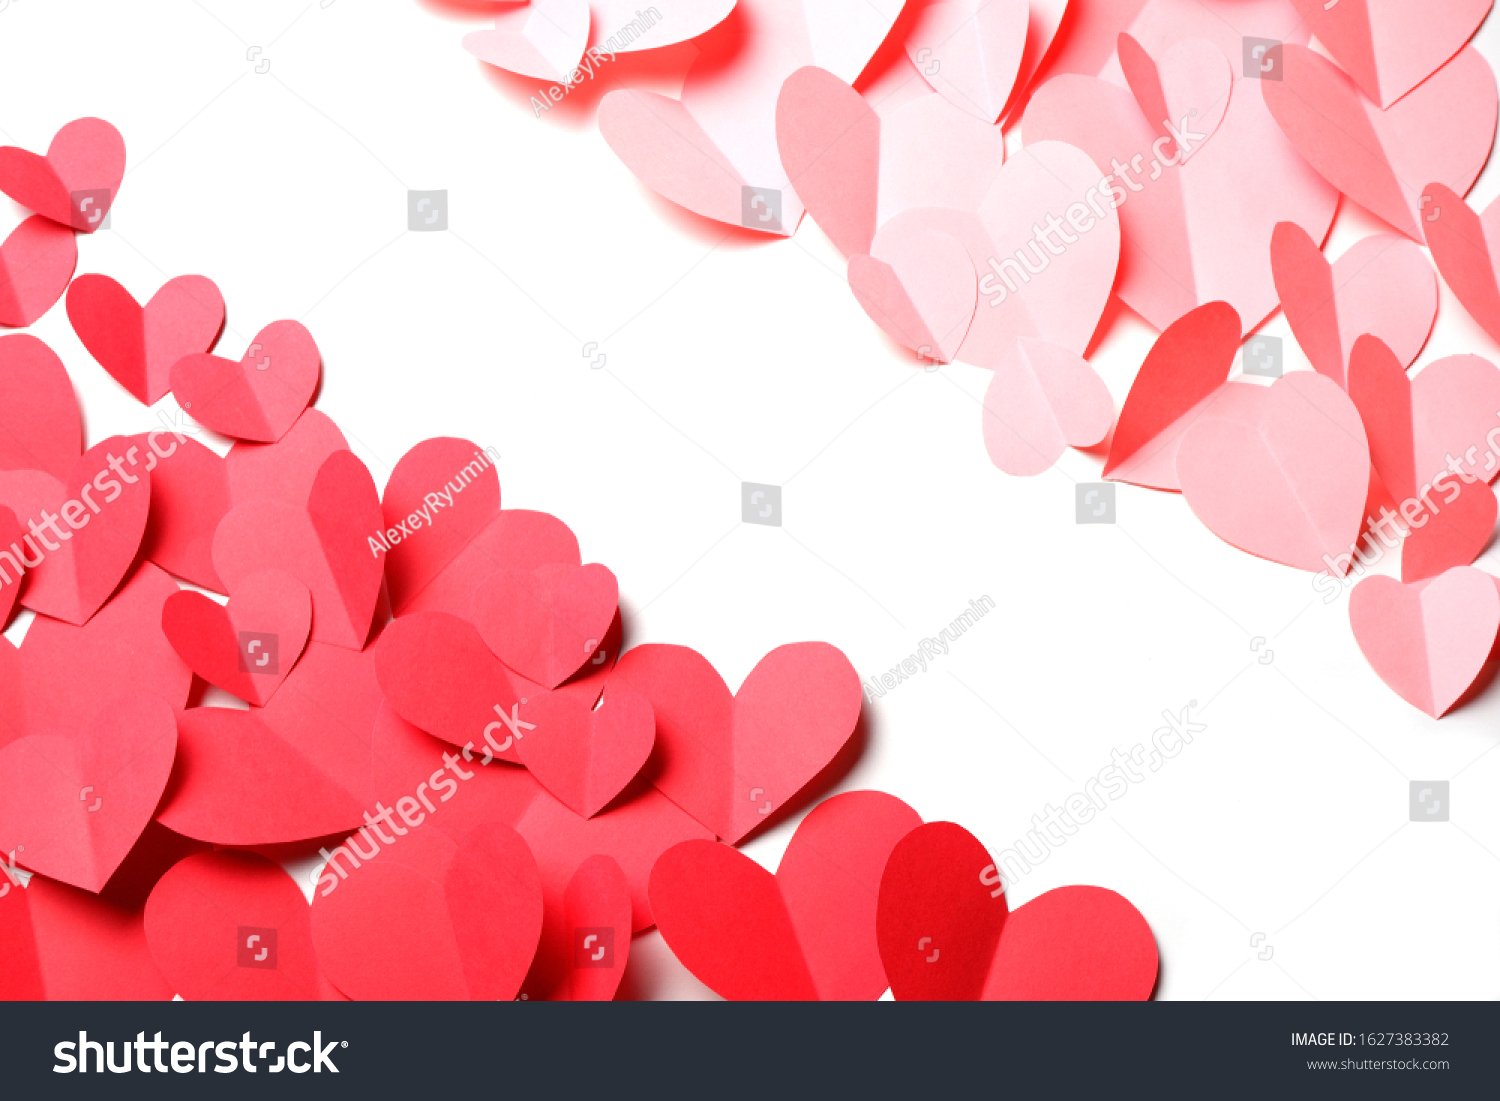 Cut out of red and pink paper hearts on red background isolated. Beautiful Valentines day, Womans day, love, romantic or wedding composition with copy space for your text  for banner, congratulation, card, offer, flyer, advertising, invitation.